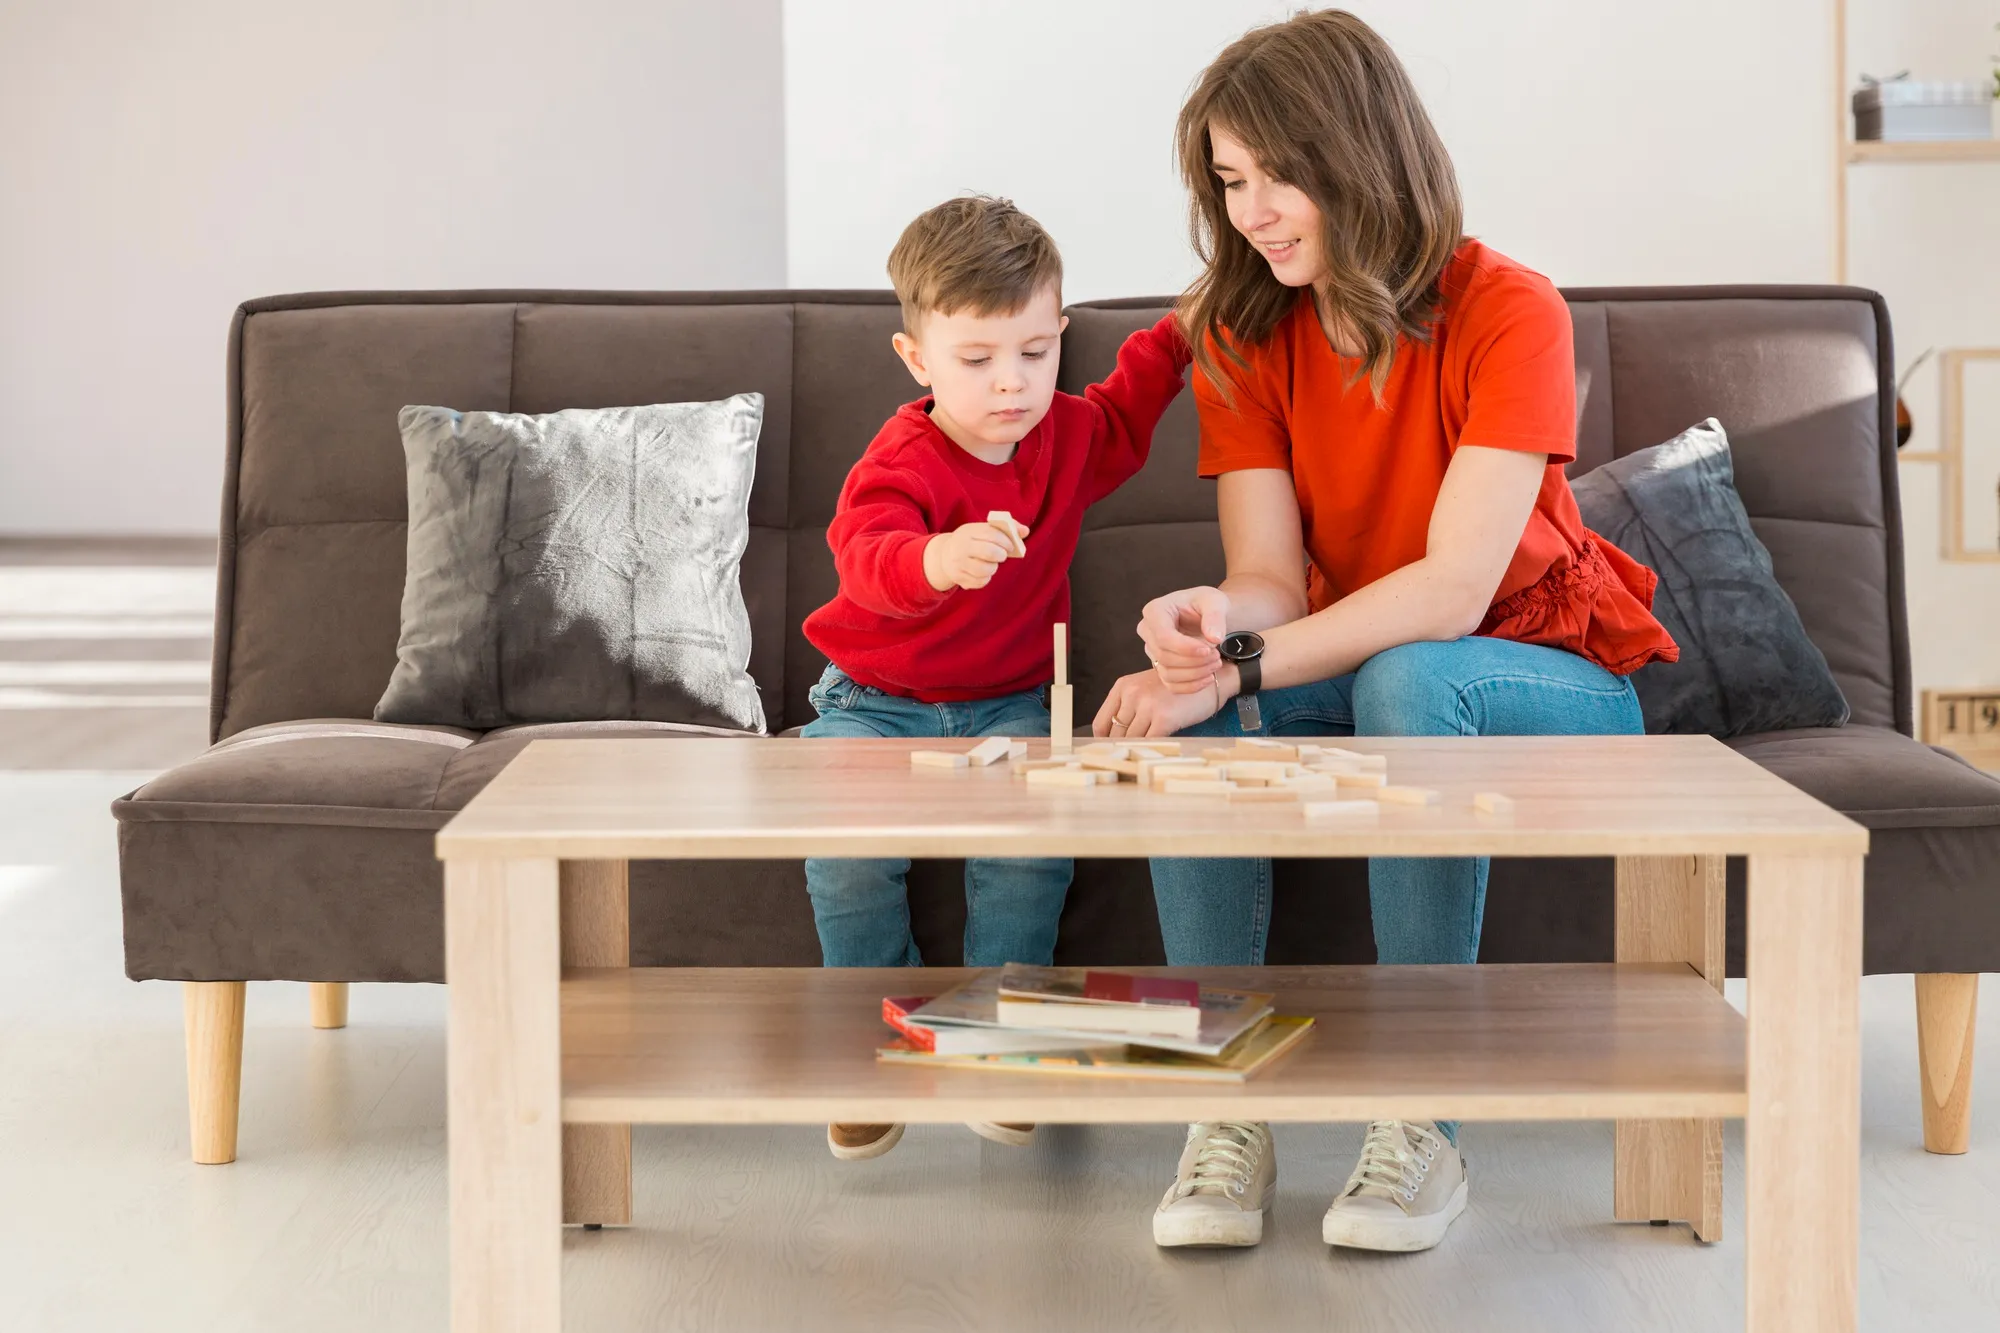 Child Safe Upholstery Cleanliness